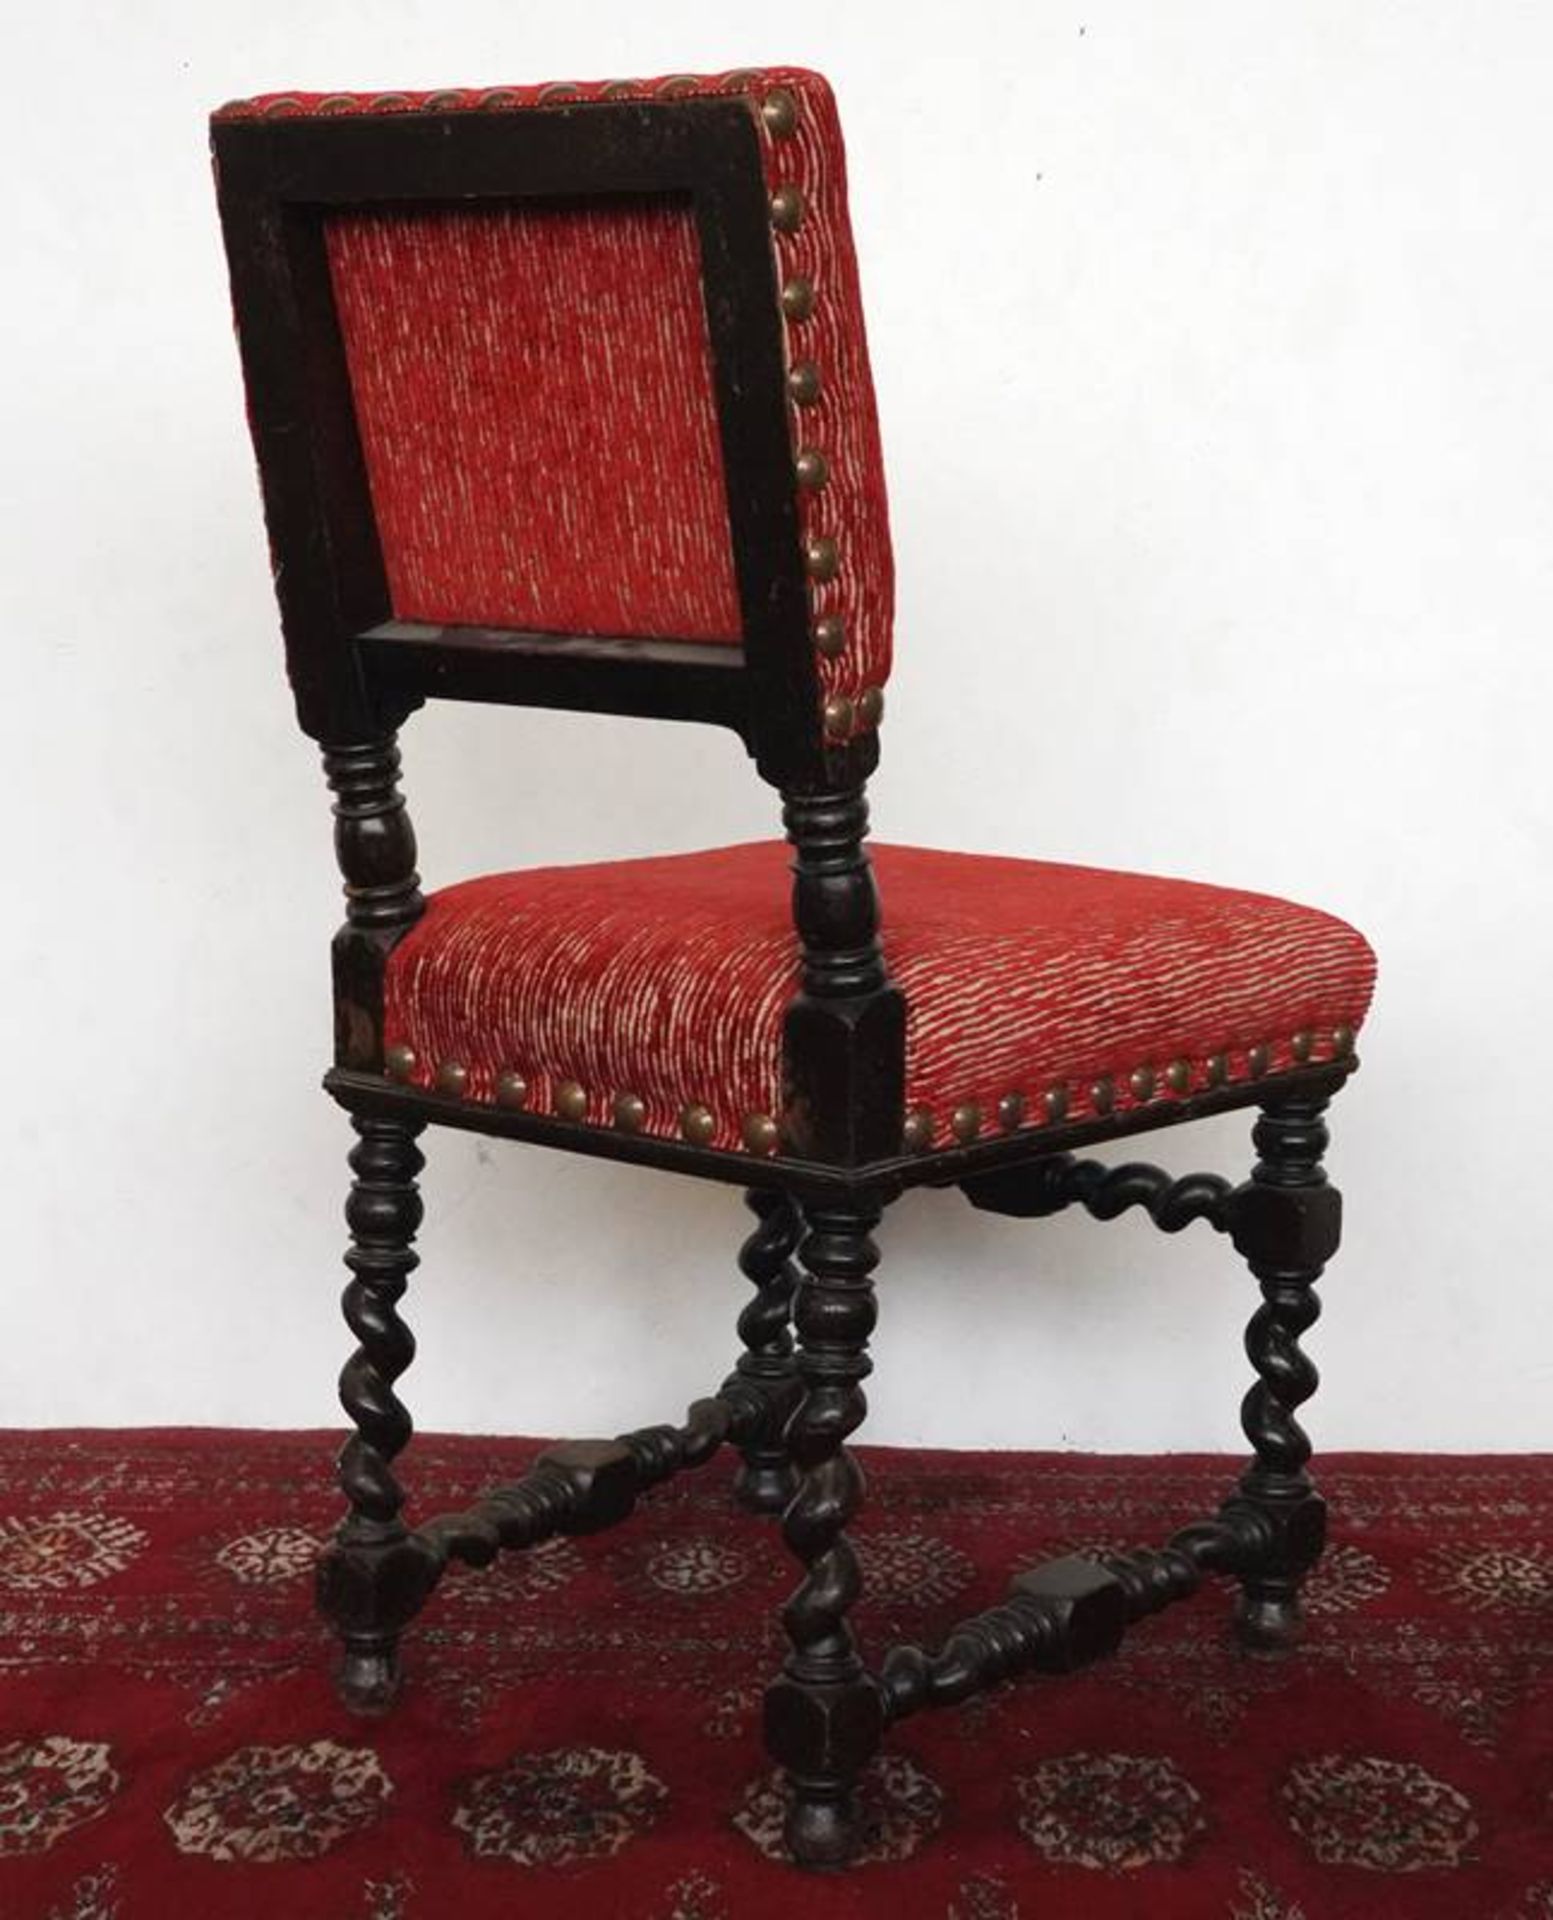 Baroque chair - Image 2 of 4